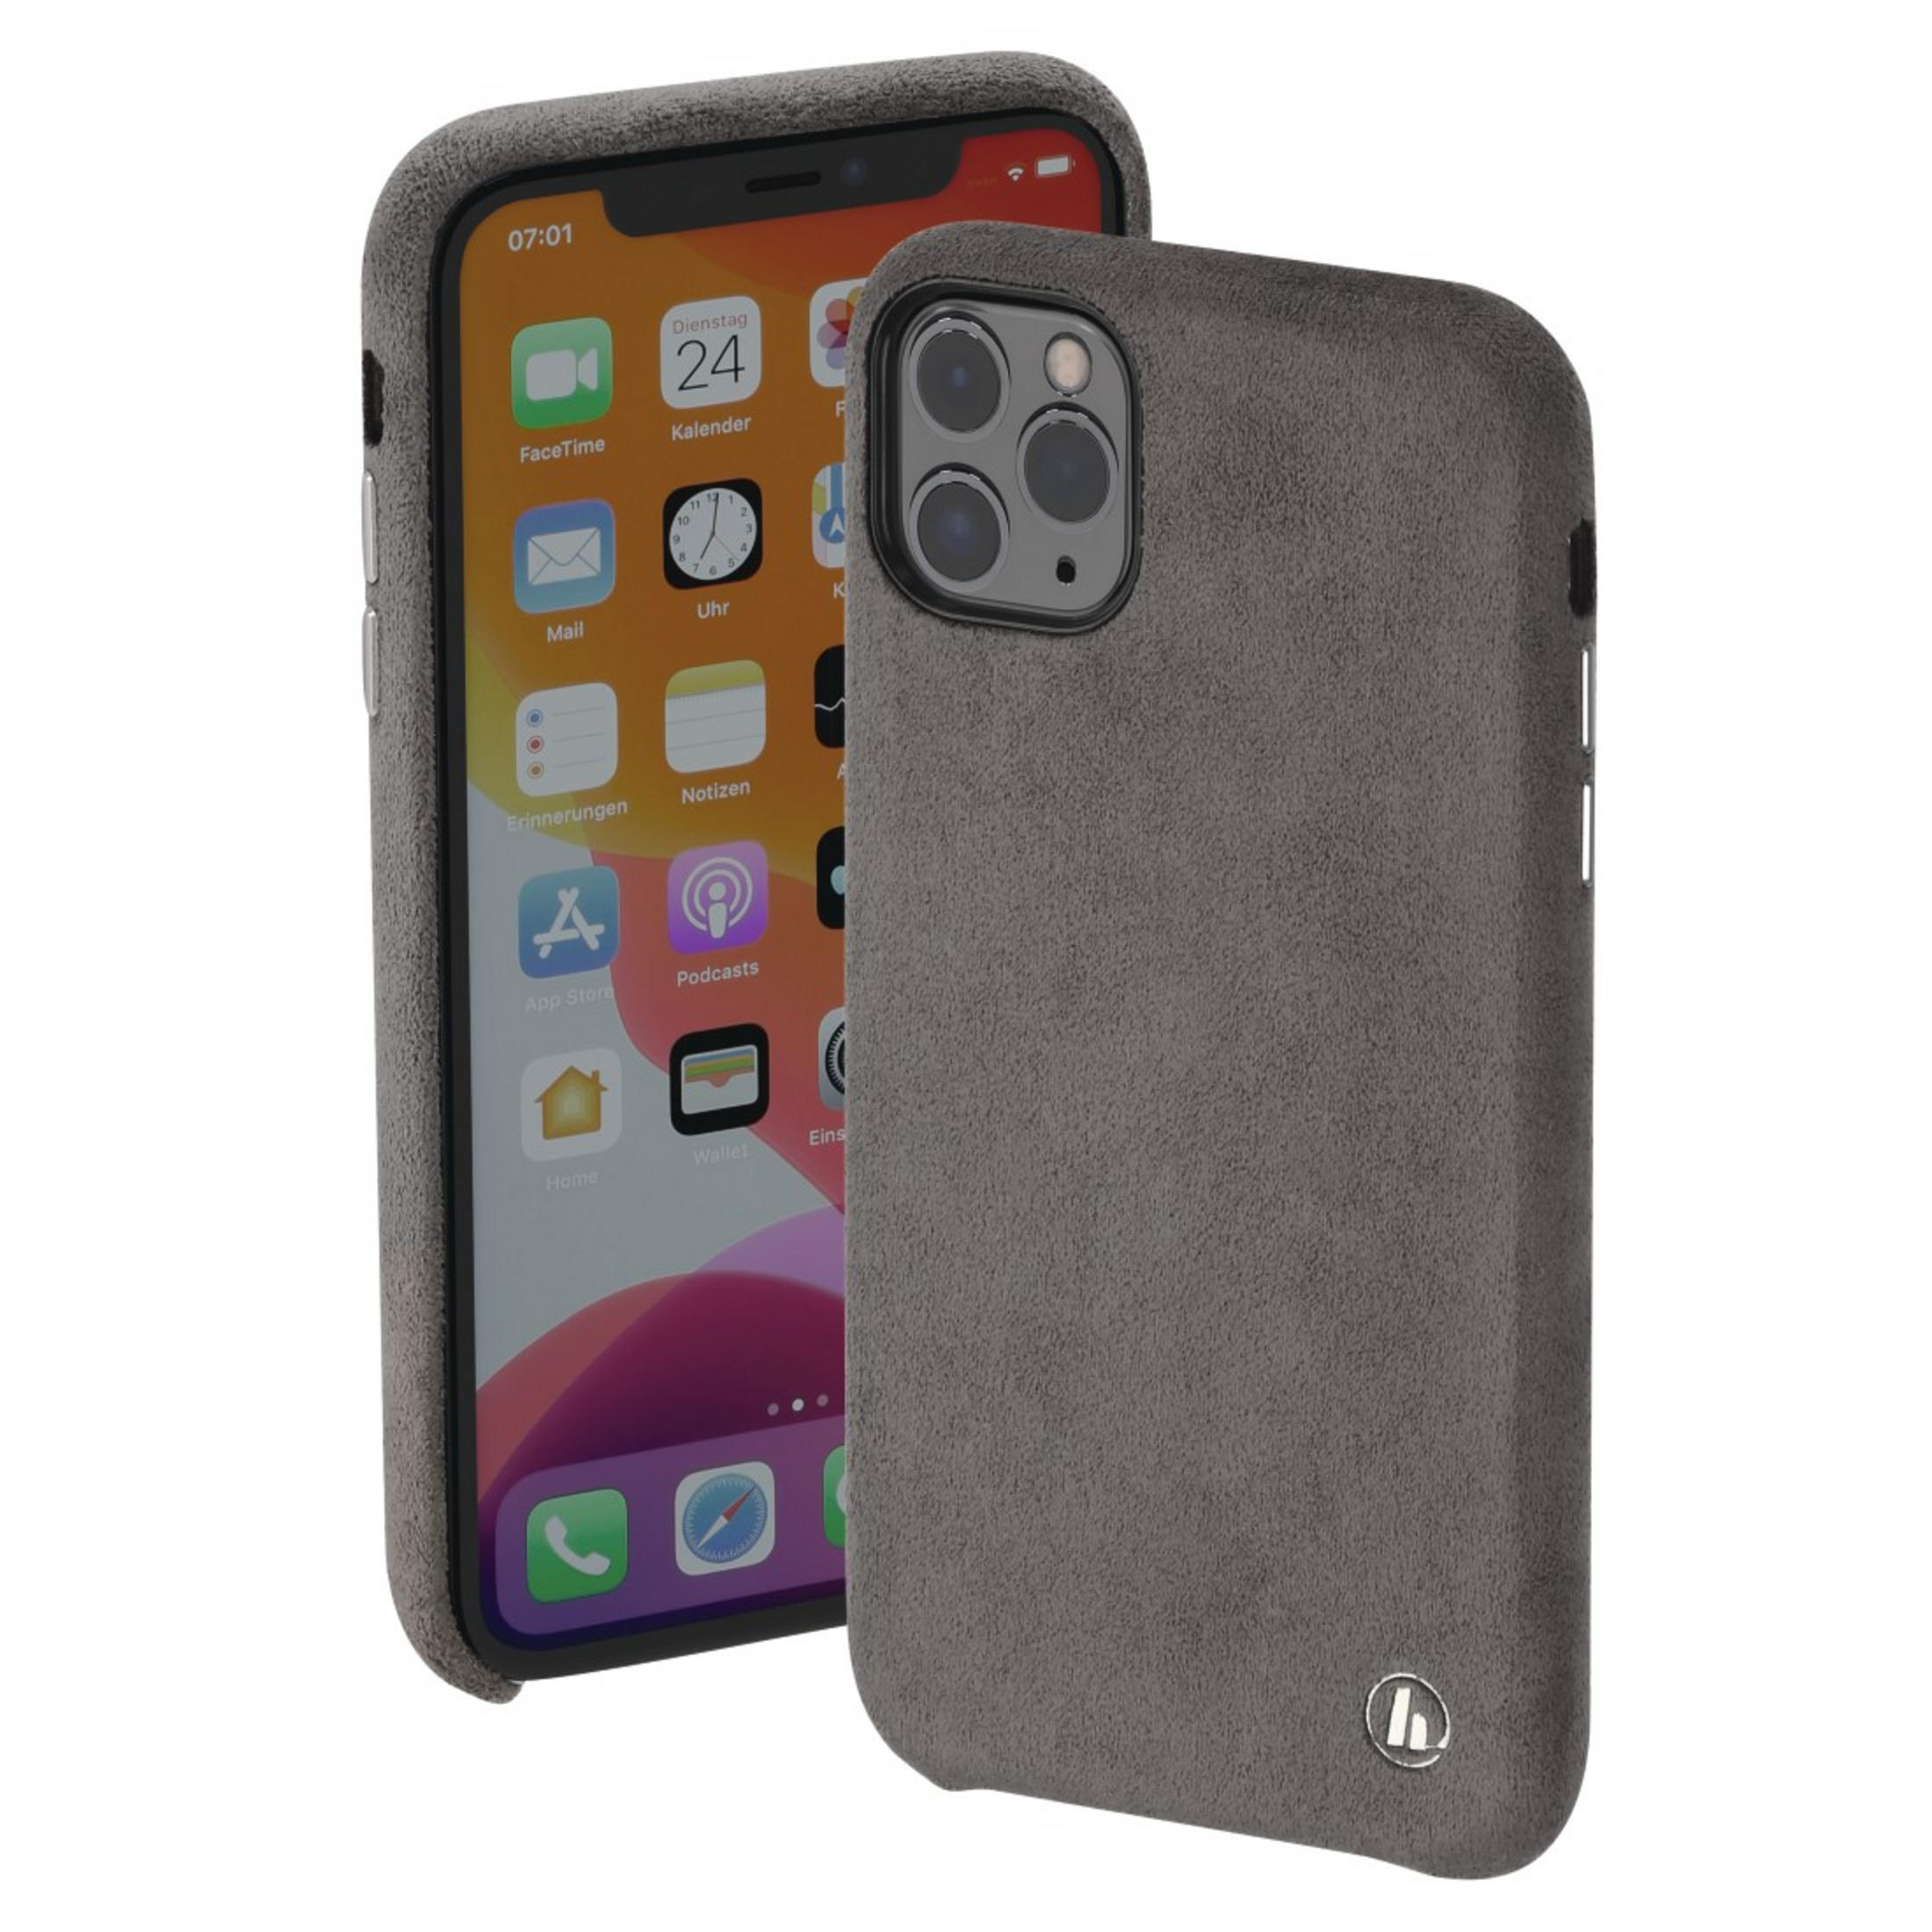 12 PRO AN, HAMA Anthrazit MAX, iPhone 00188837 IPH Max, CO Pro Apple, Backcover, FINEST TOUCH 12